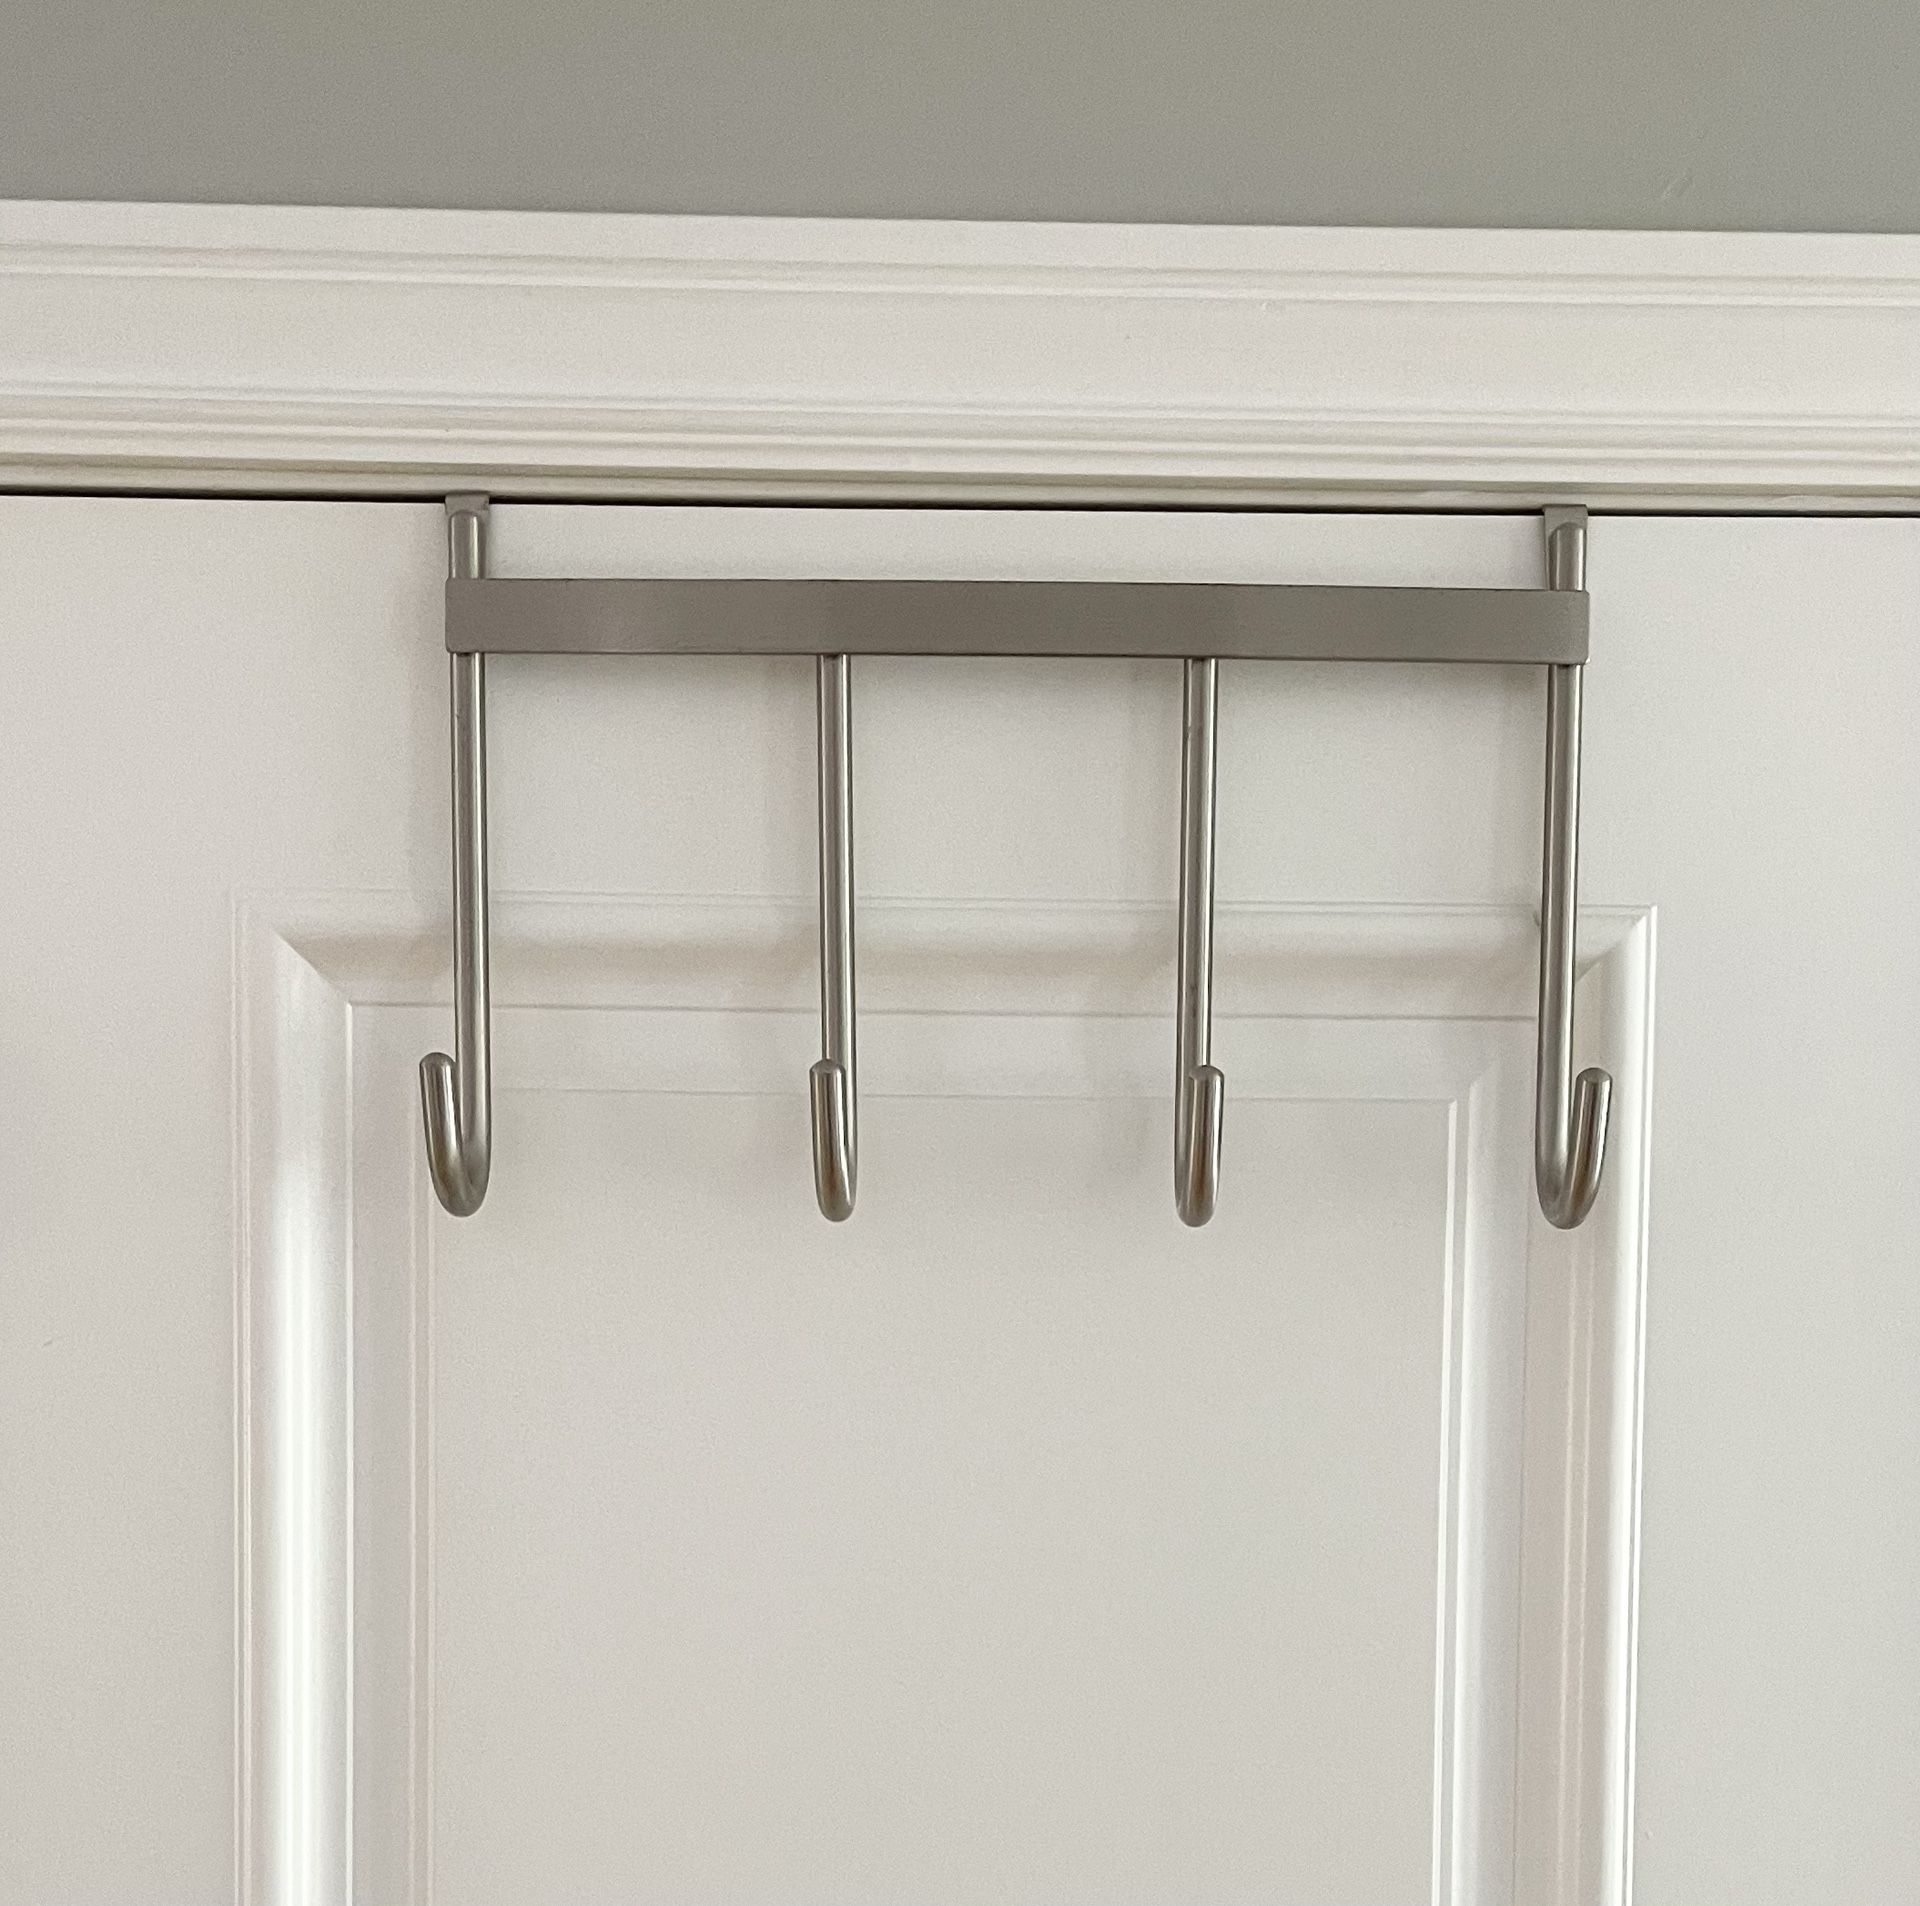 Over The Door Hanger With 4 Hooks For Clothes Or Towel 